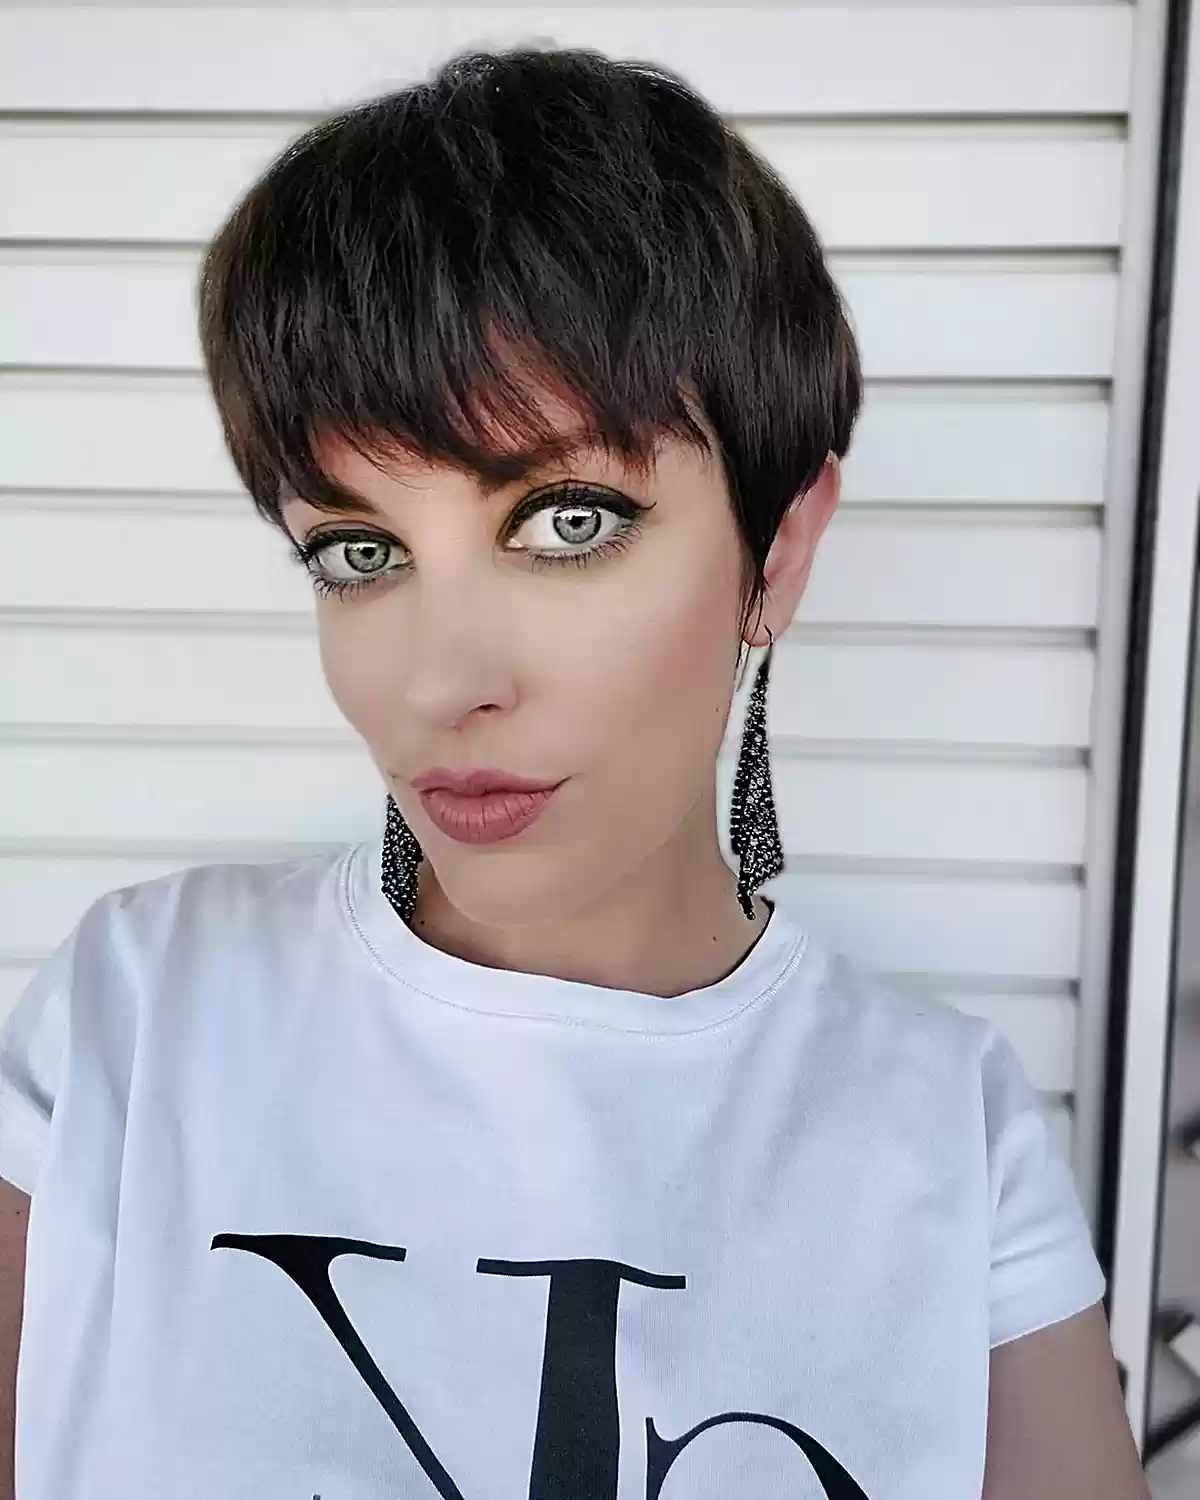 1990s Chic Pixie Hair with Heavy Bangs